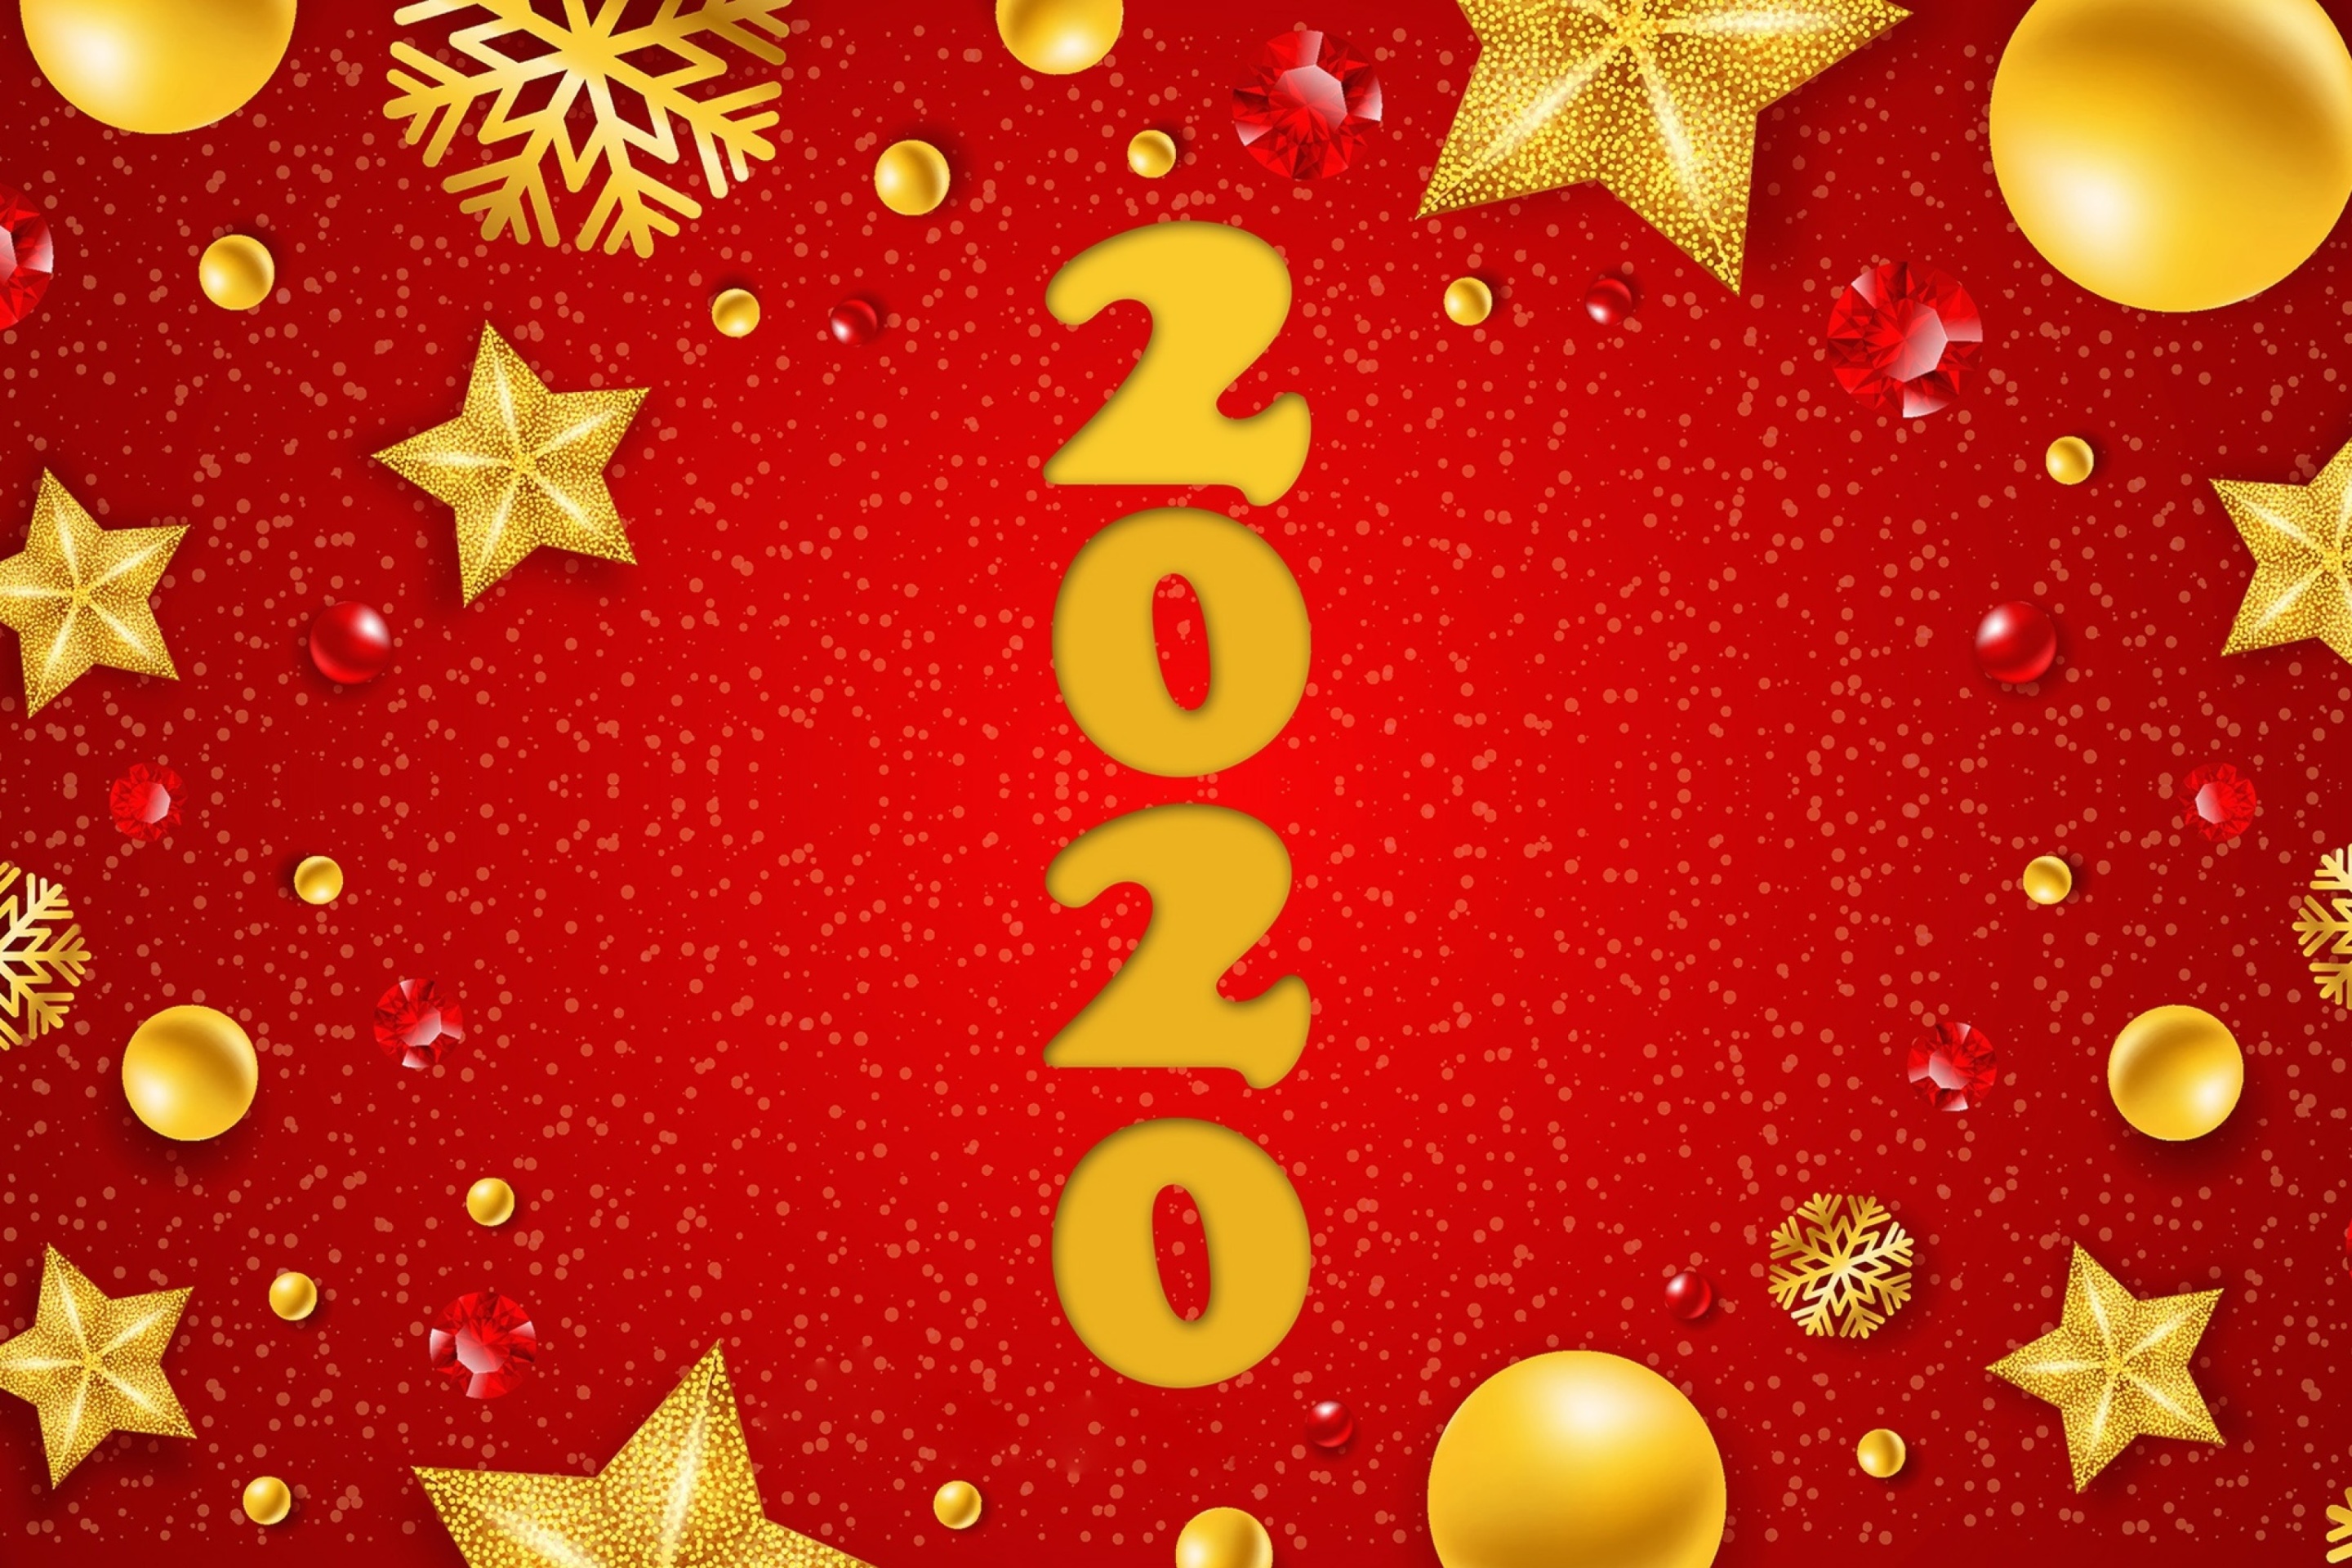 Happy New Year 2020 Messages wallpaper 2880x1920